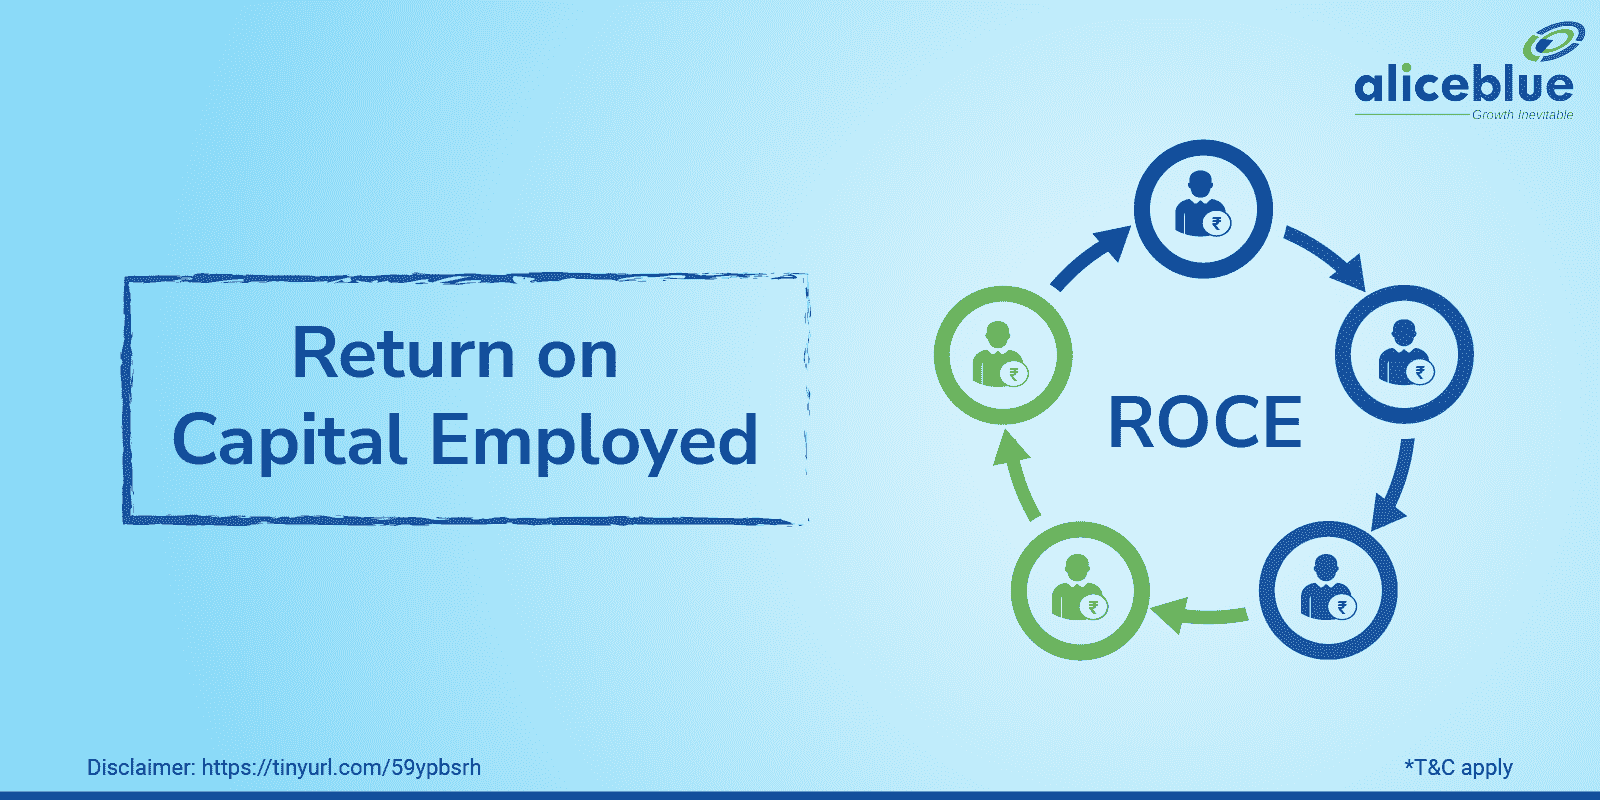 What is Return on Capital Employed?